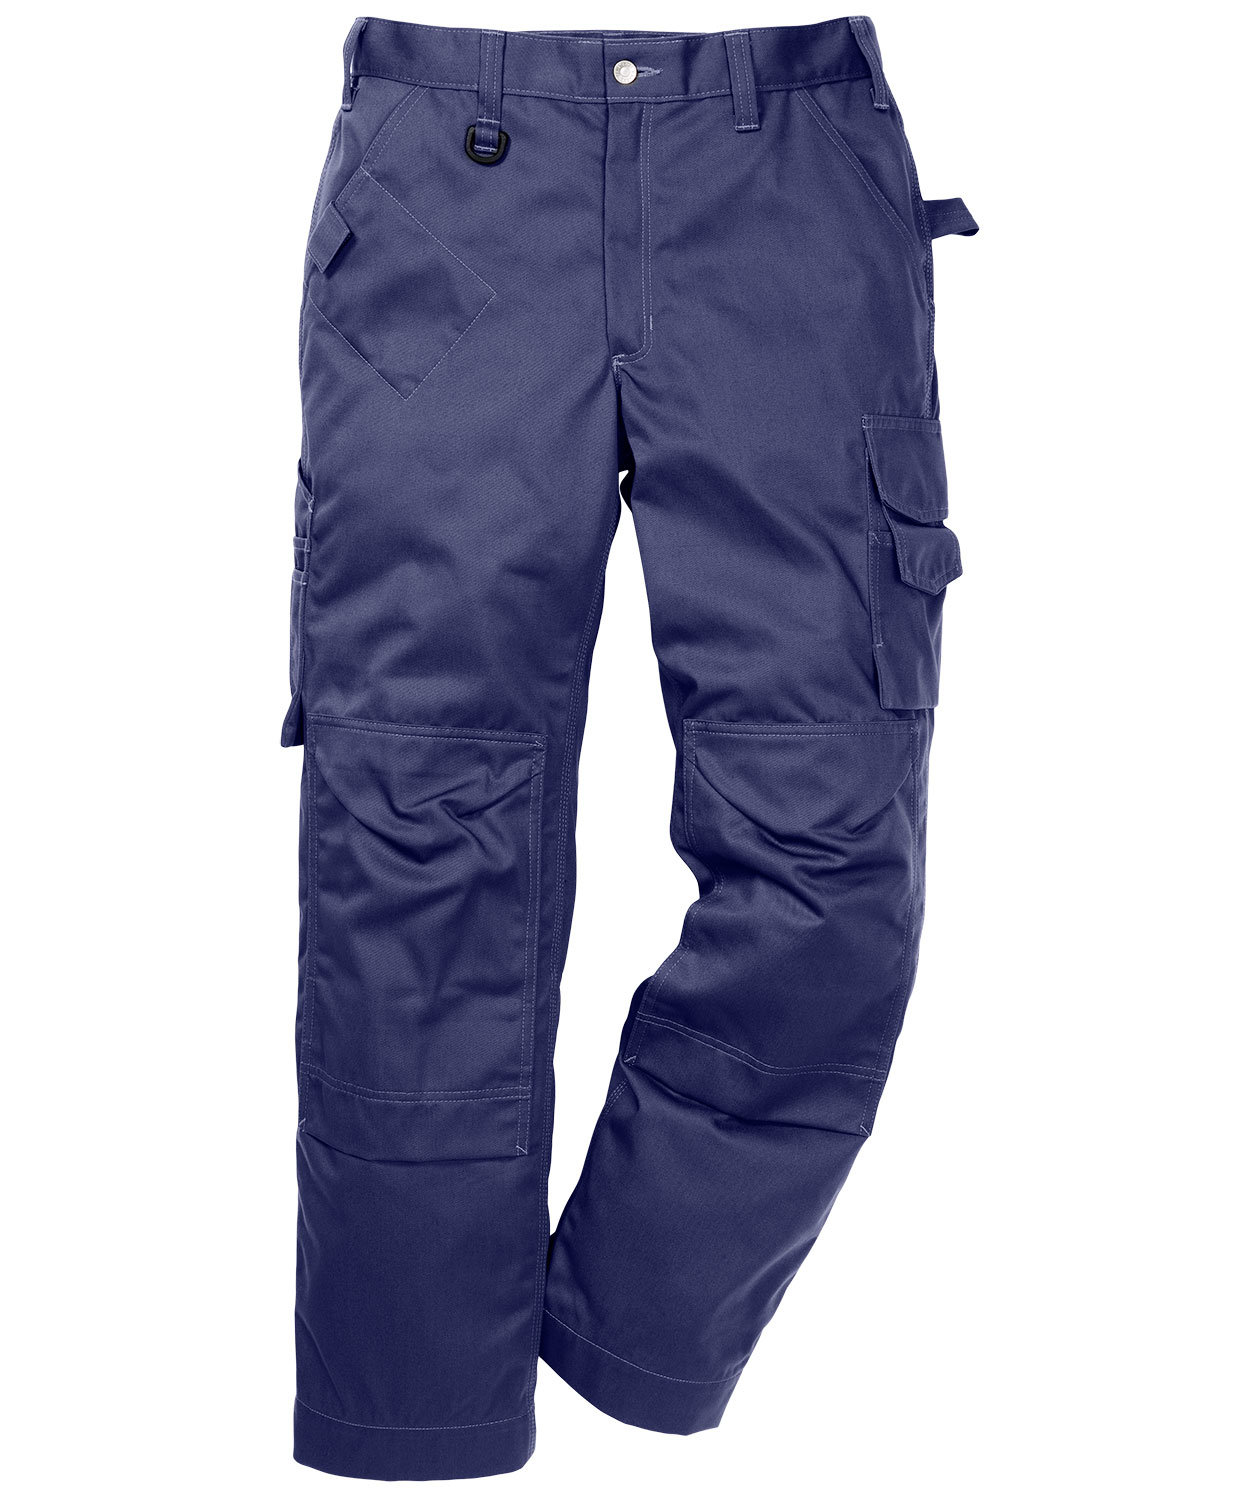 Men's blue trousers И-37M-1 - buy cheap in the online store 